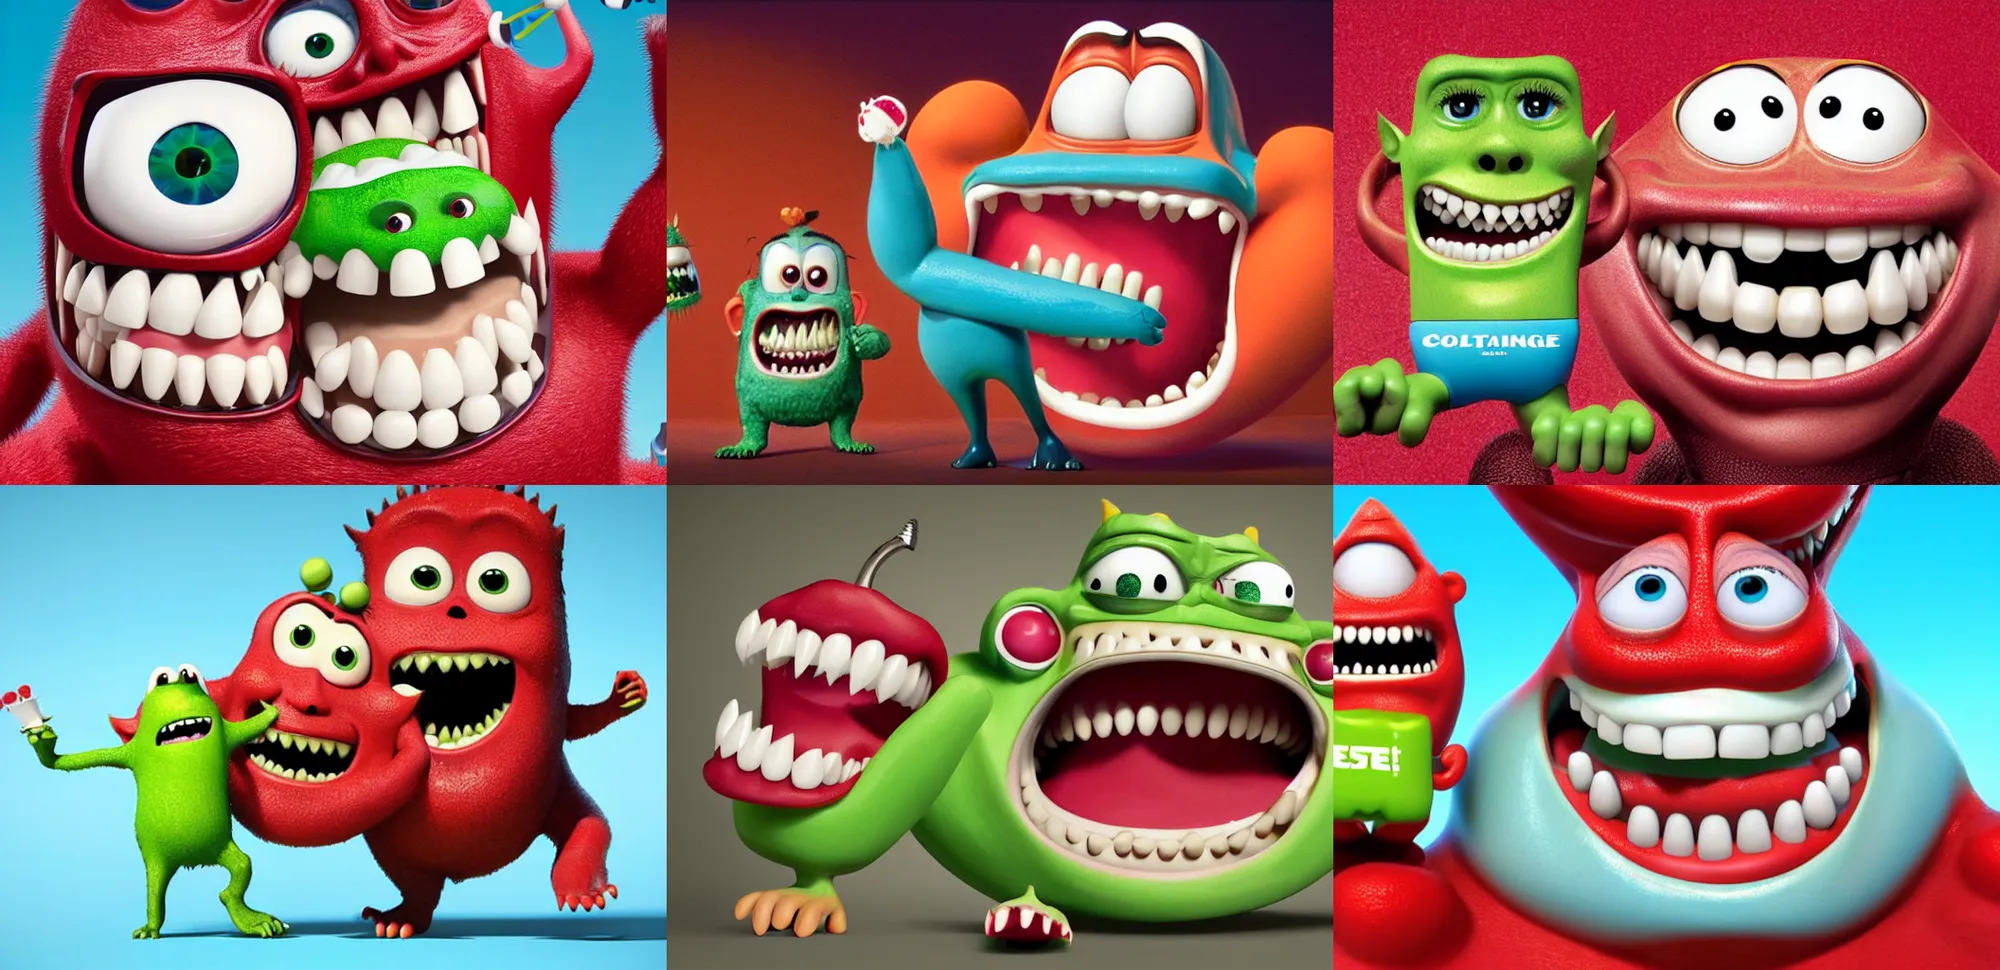 Prompt: A Colgate-shaped monster as advertisement for toothpaste, 3D physical tactile illustration vintage, TV Commercial break, advertisment poster printed CMYK ink colored lithography, big smiling perfect teeth shiny porous skin, highly detailed monster teeth, low-res edgy, still from a Pixar John Lasseter movie